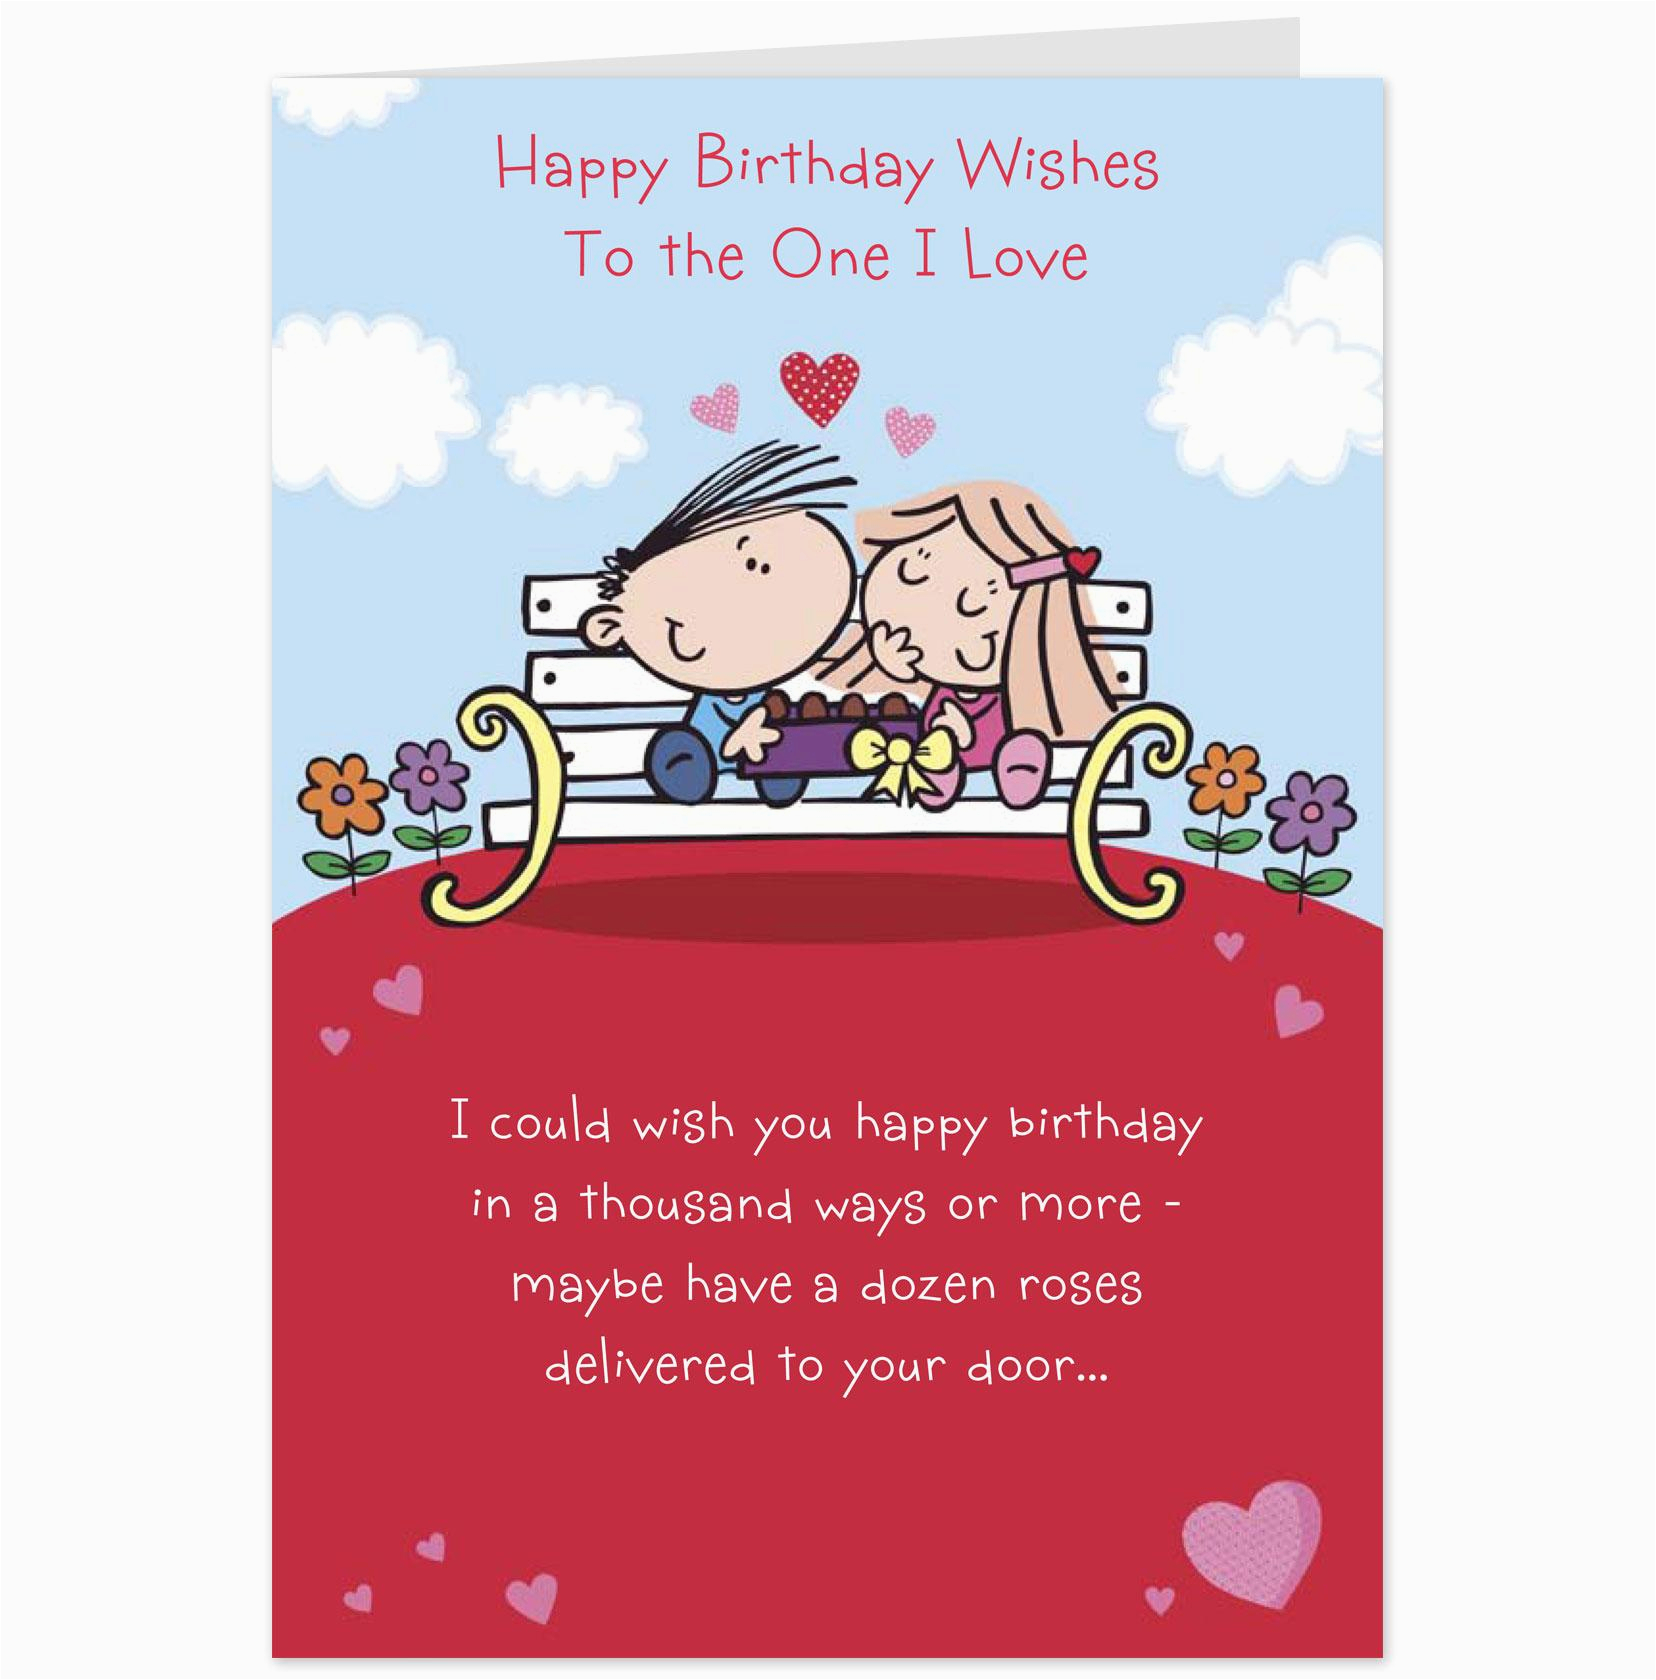 Birthday Cards for the Man I Love Funny Happy Birthday Quotes for Him Quotesgram